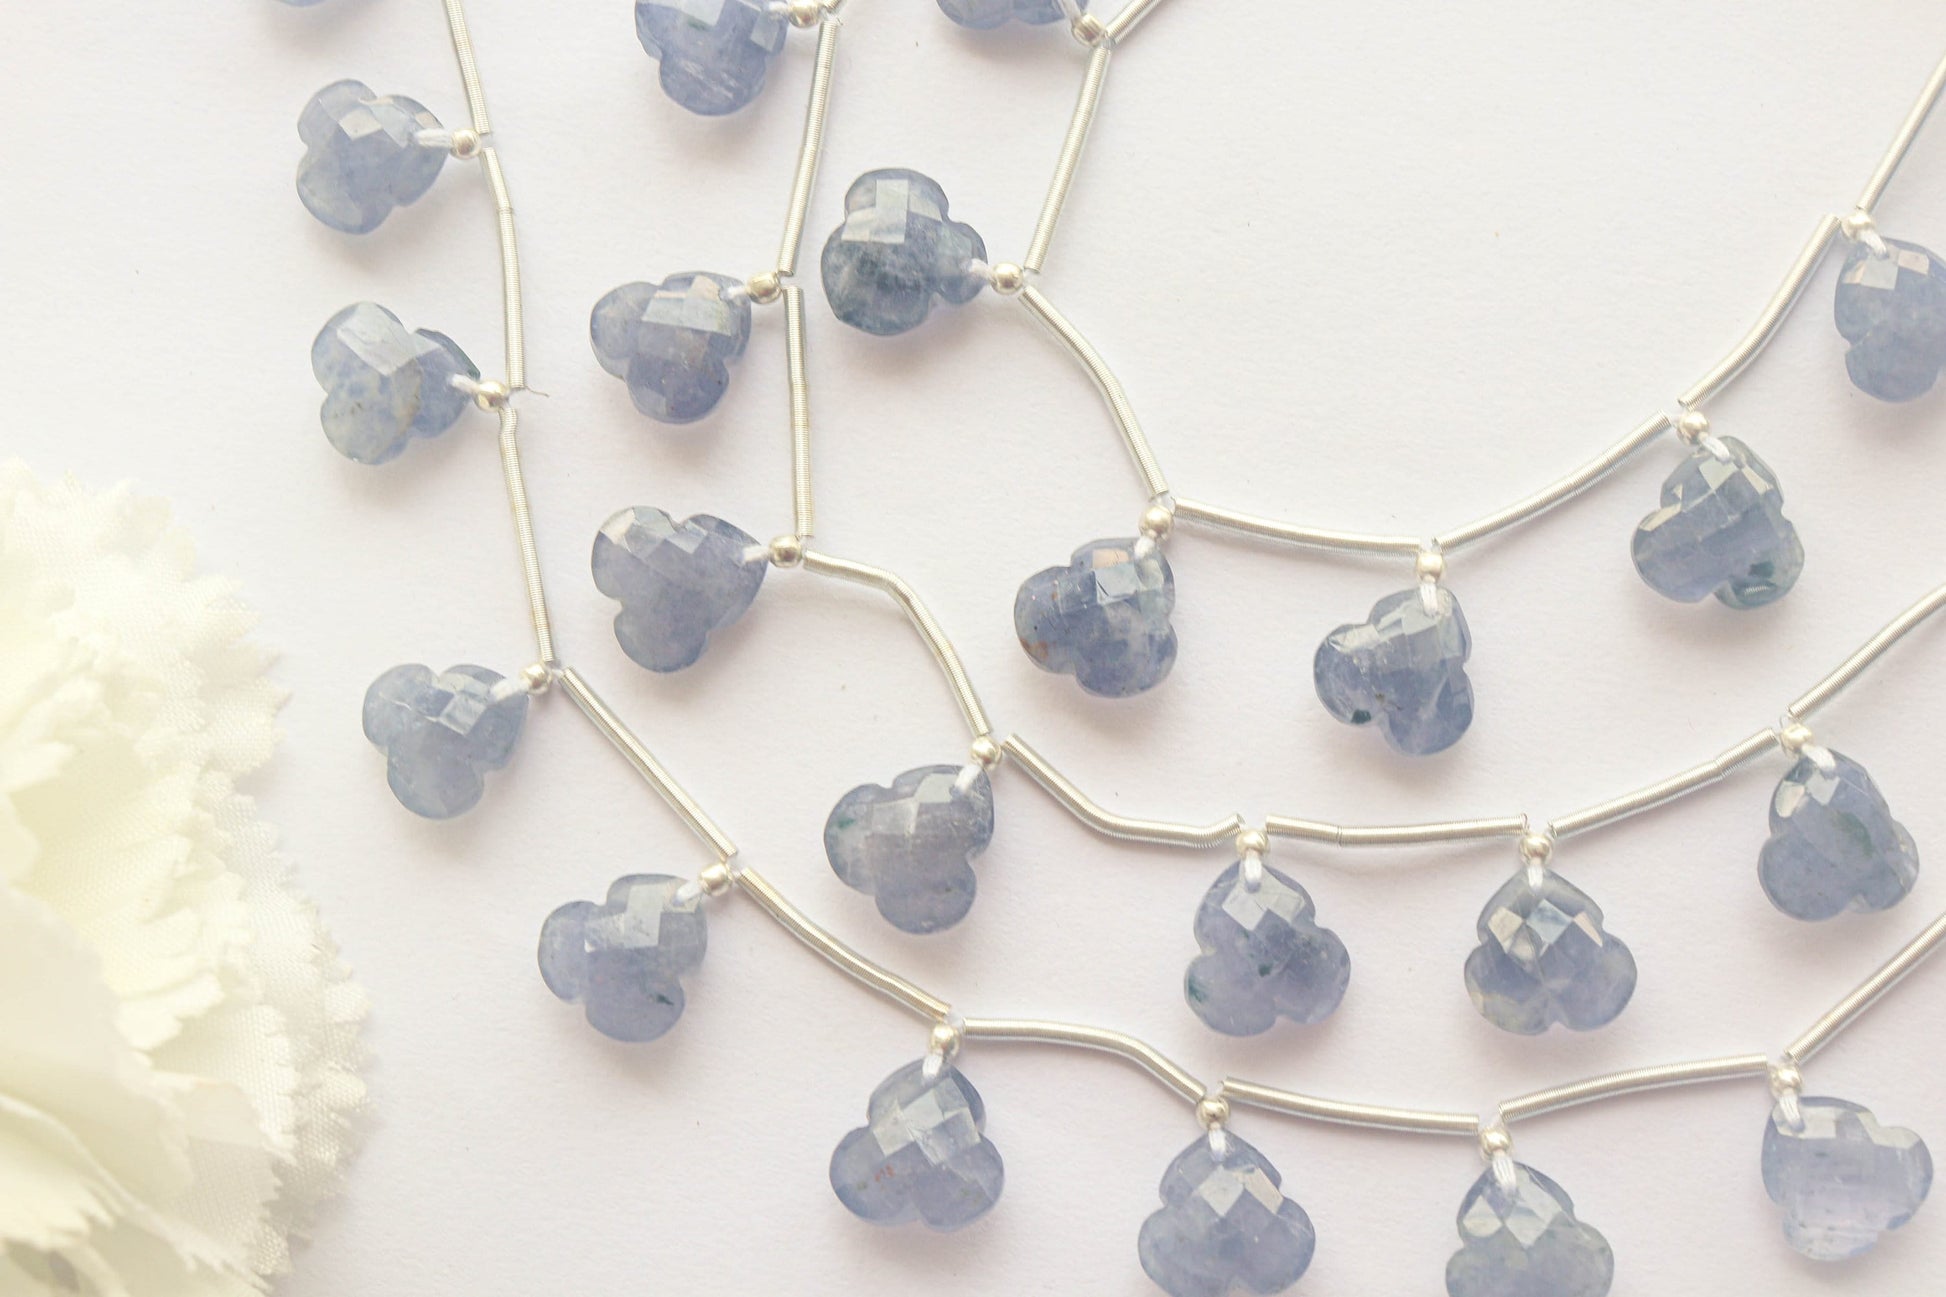 Iolite Flower shape Faceted Beads | 8 Inch String | Natural Gemstone | 10 Pieces | 11x11mm | Beadsforyourjewelry Beadsforyourjewelry